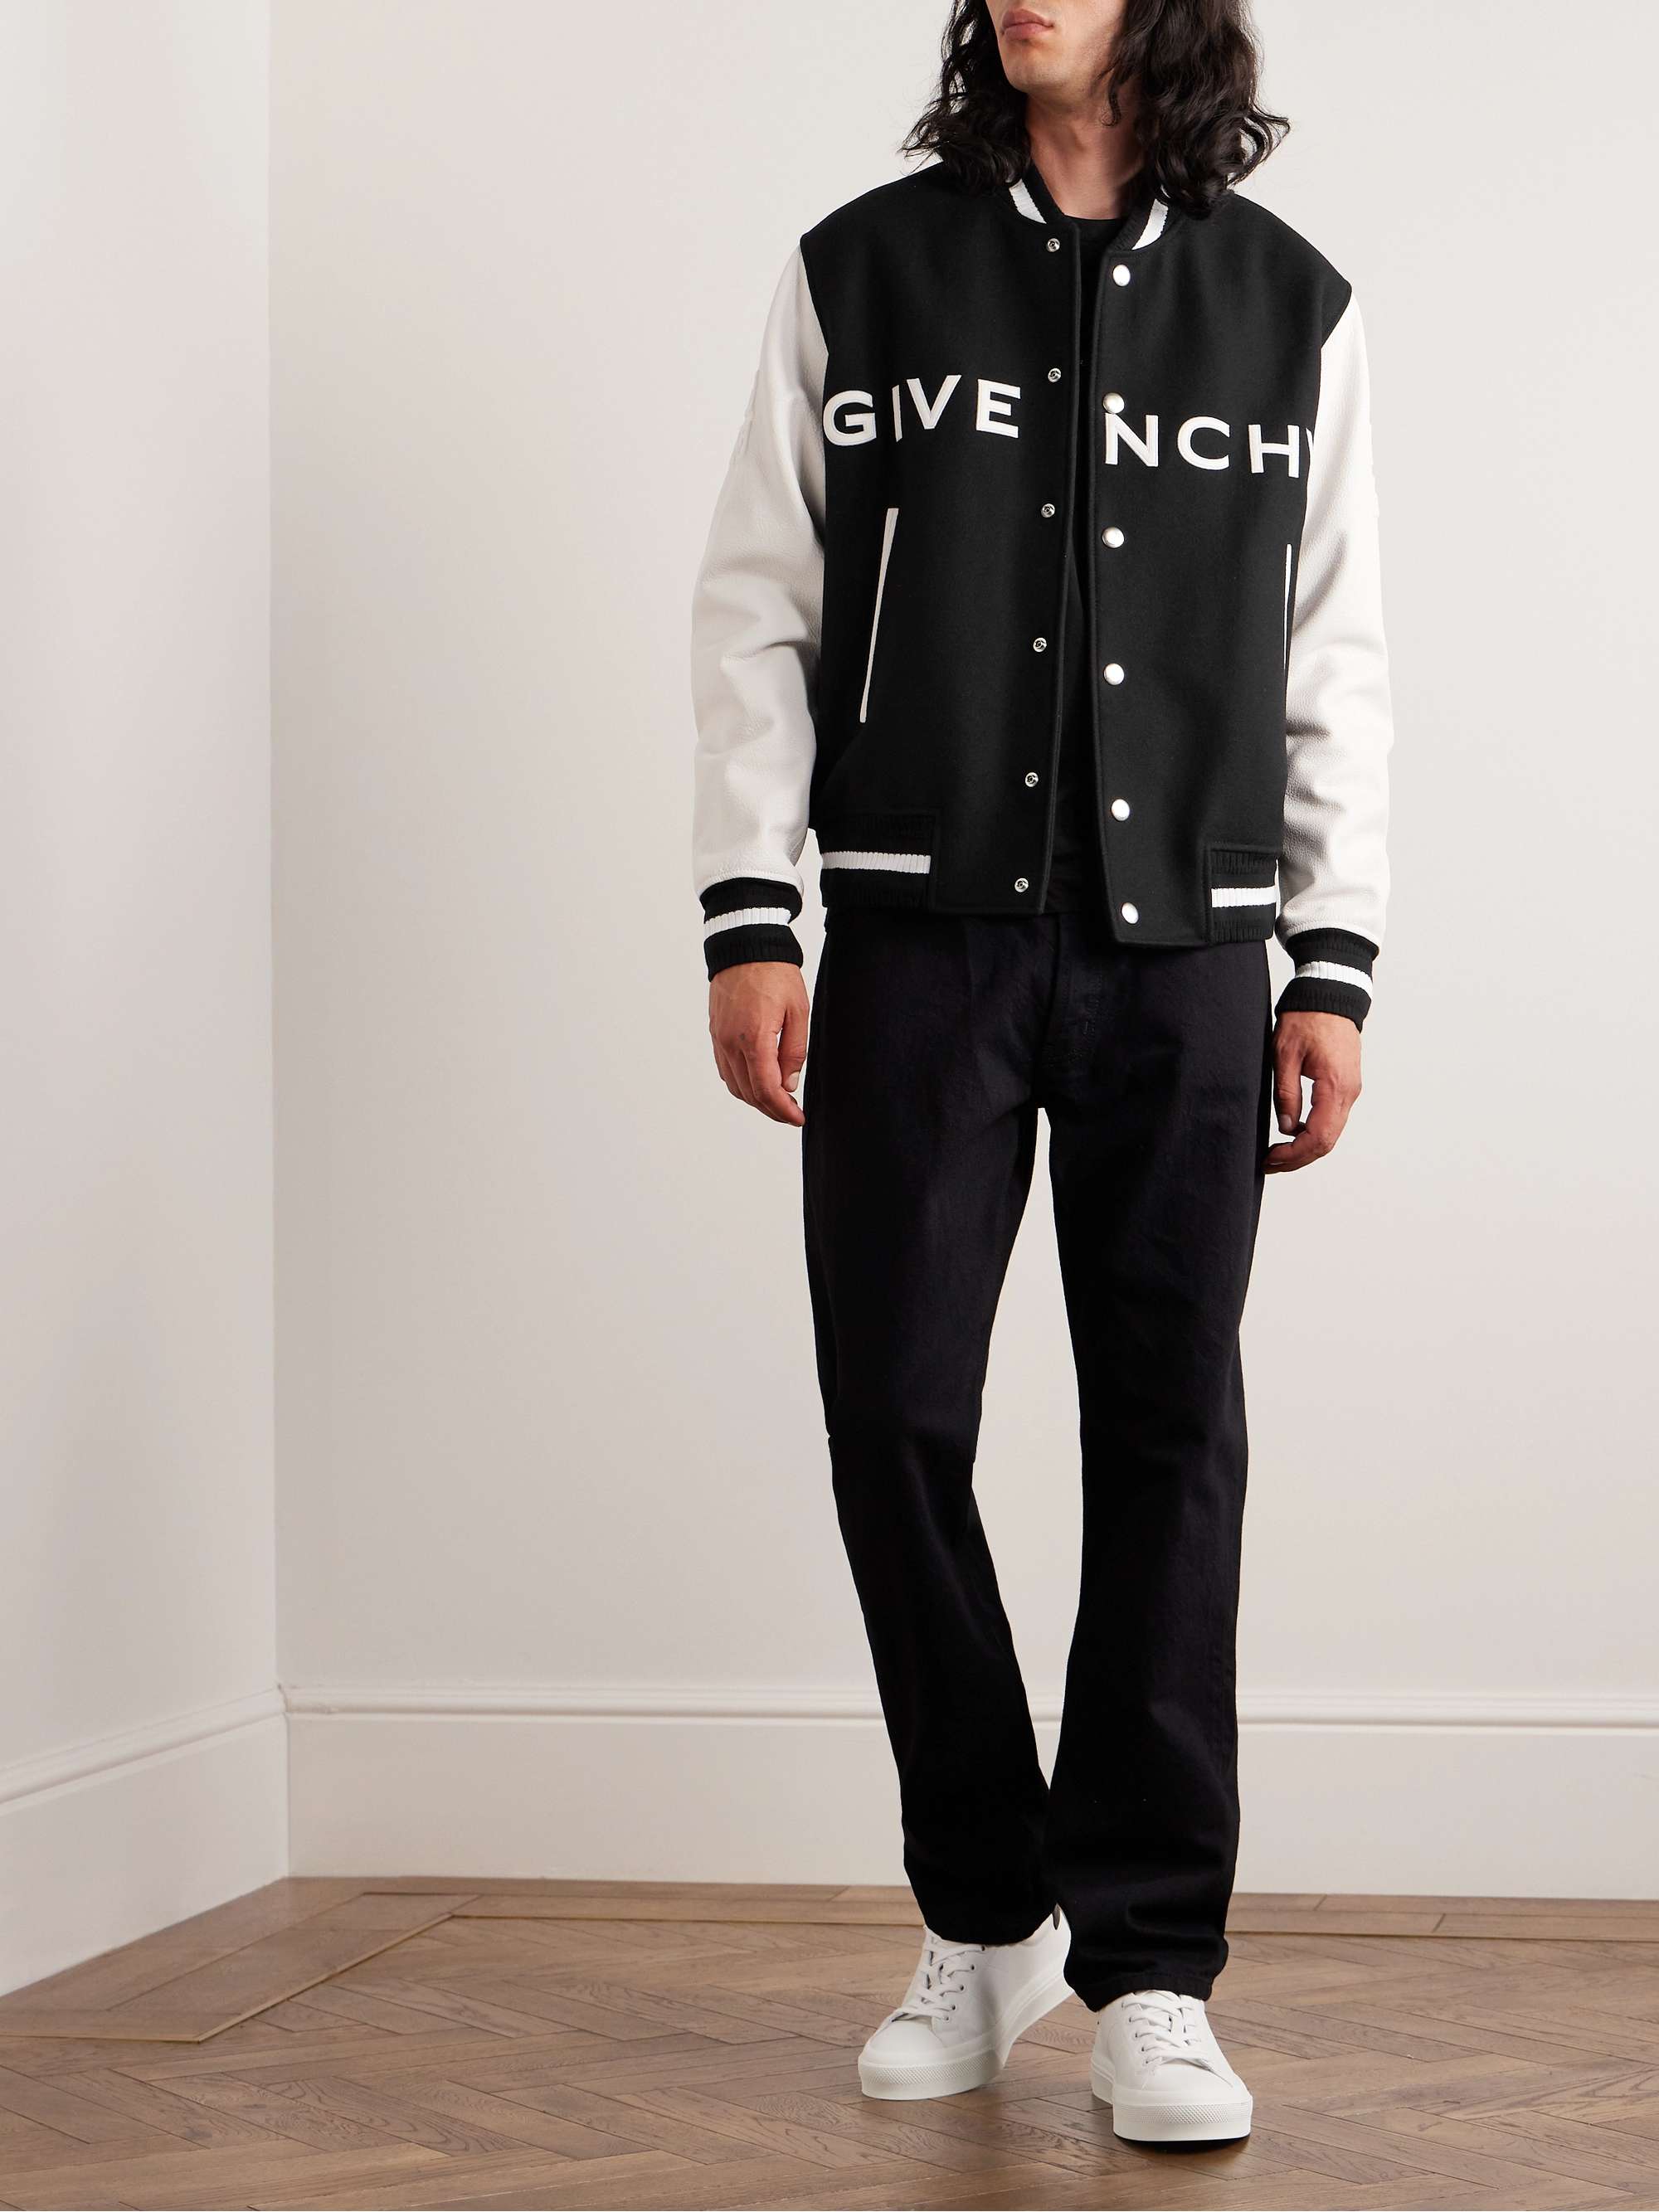 GIVENCHY Logo-Embroidered Wool-Blend and Leather Bomber Jacket for Men